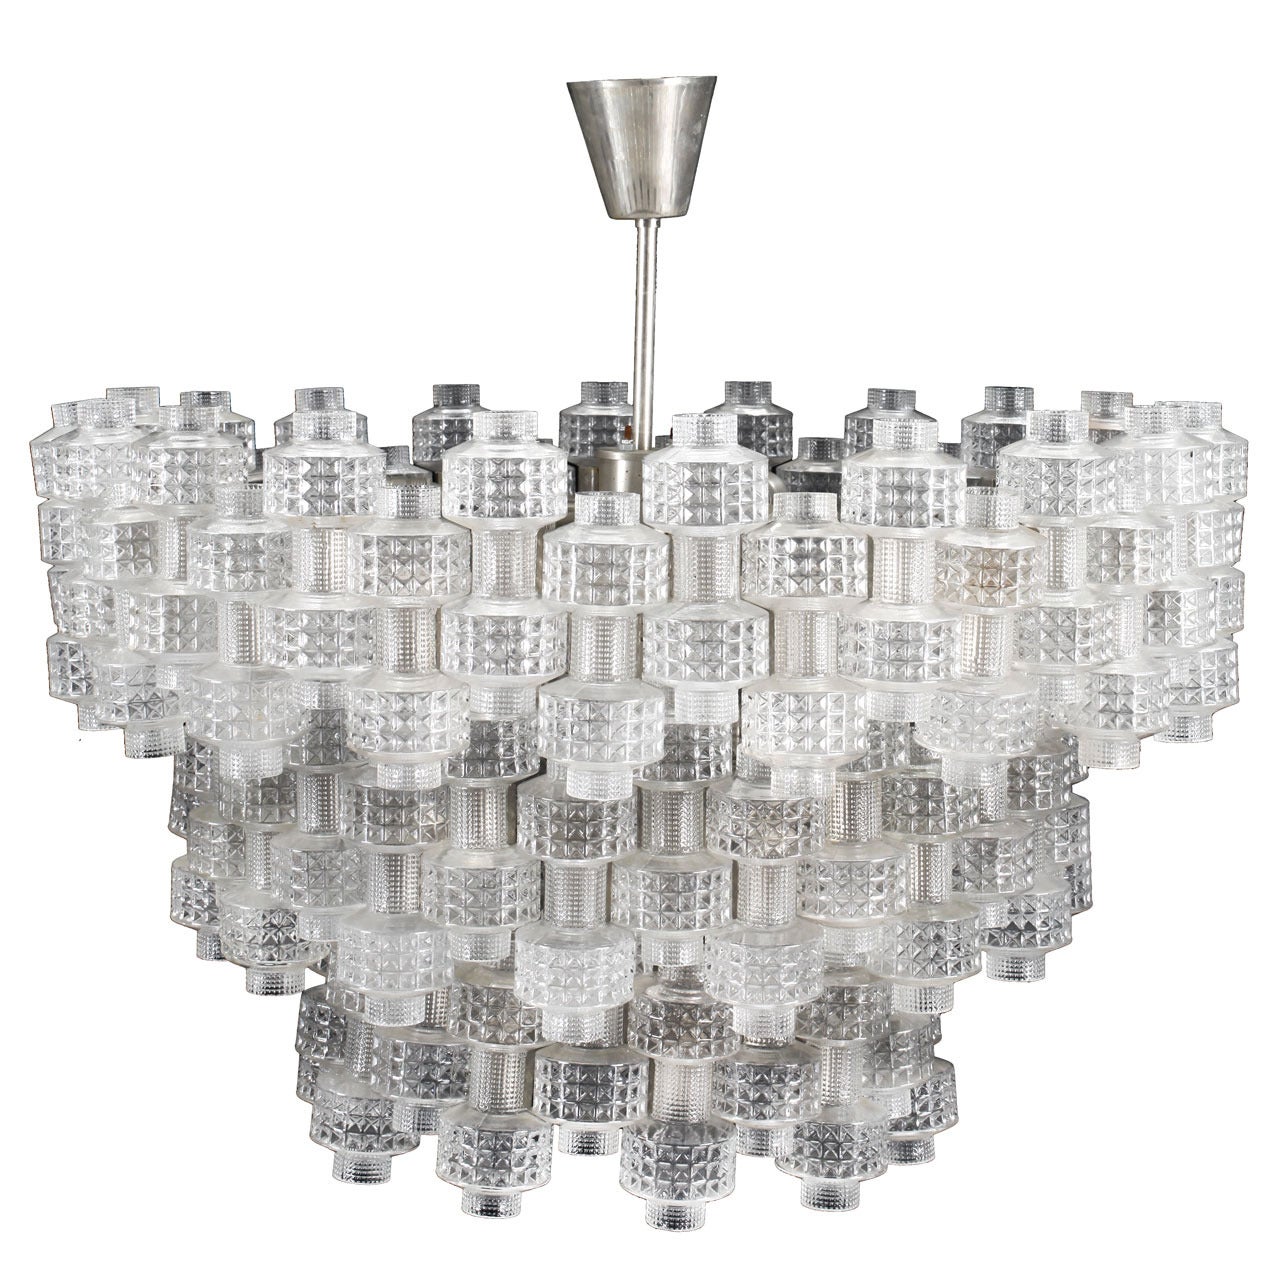 Massive Carl Fagerlund Crystal Glass Orrefors Chandelier For Sale